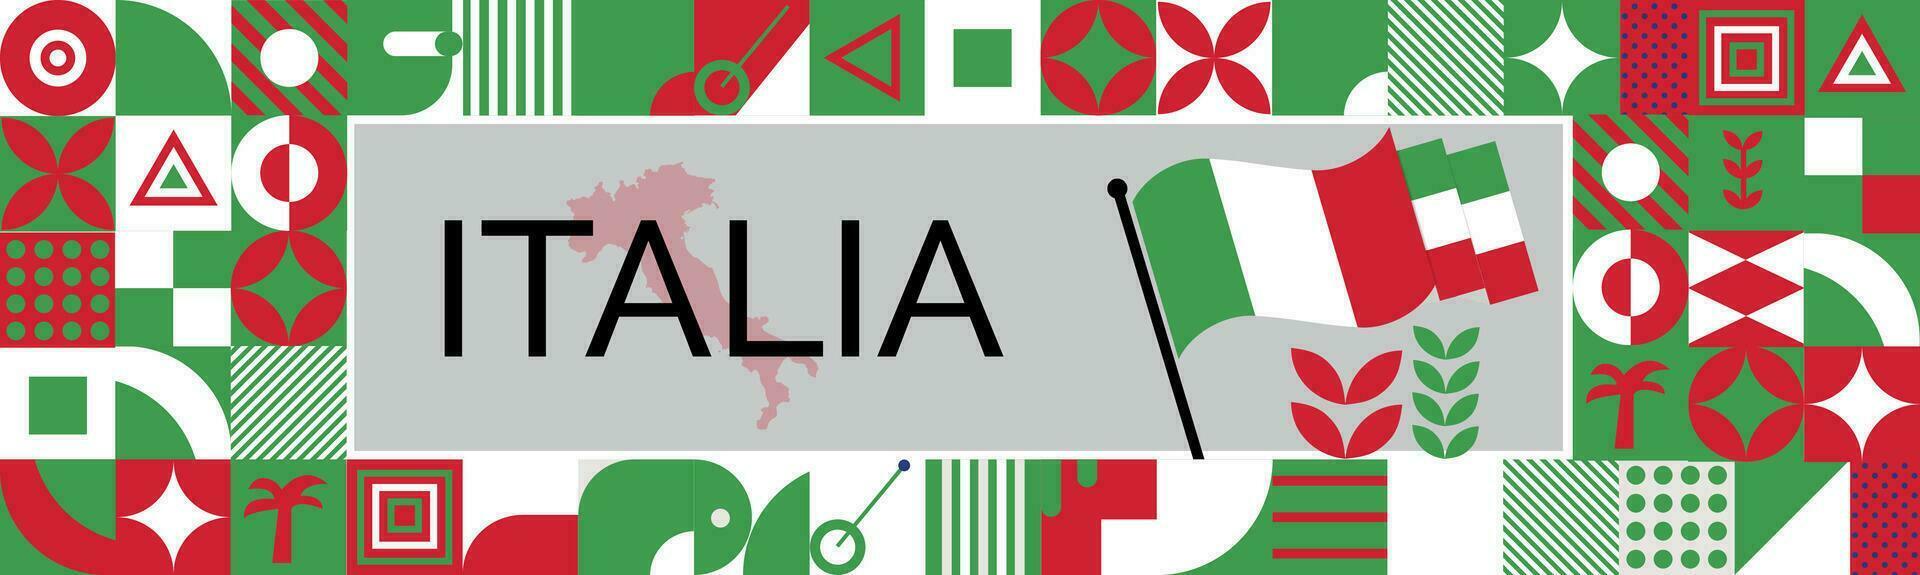 Italia national day banner with map, Flag of united arab emirates  colors theme background and geometric abstract retro modern colorfull design with raised hands or fists. vector